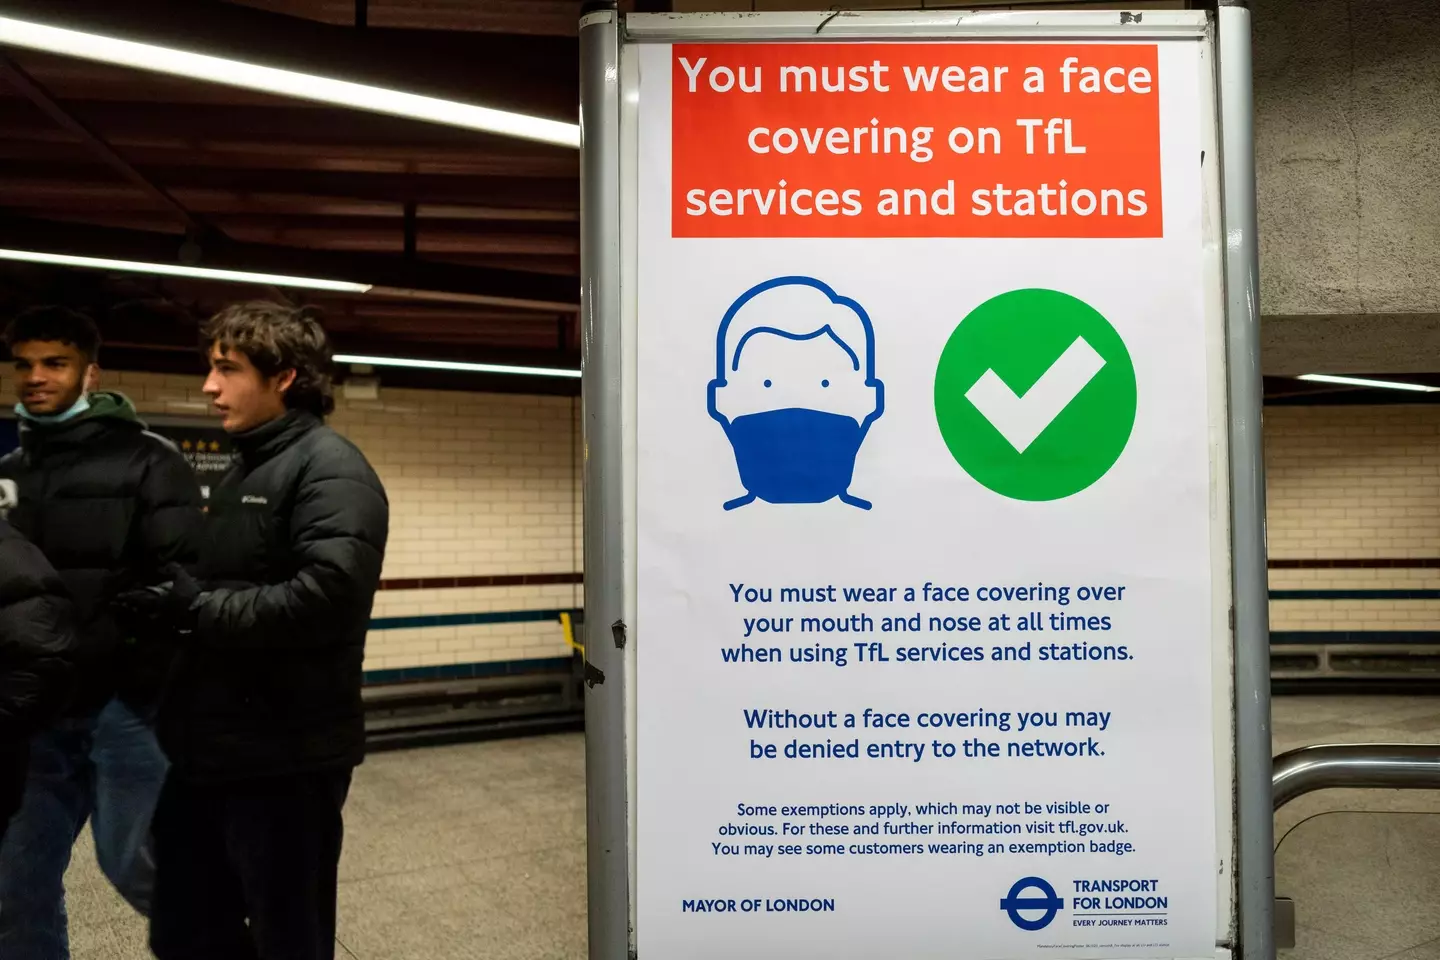 Face coverings must now be worn on public transport and in shops.